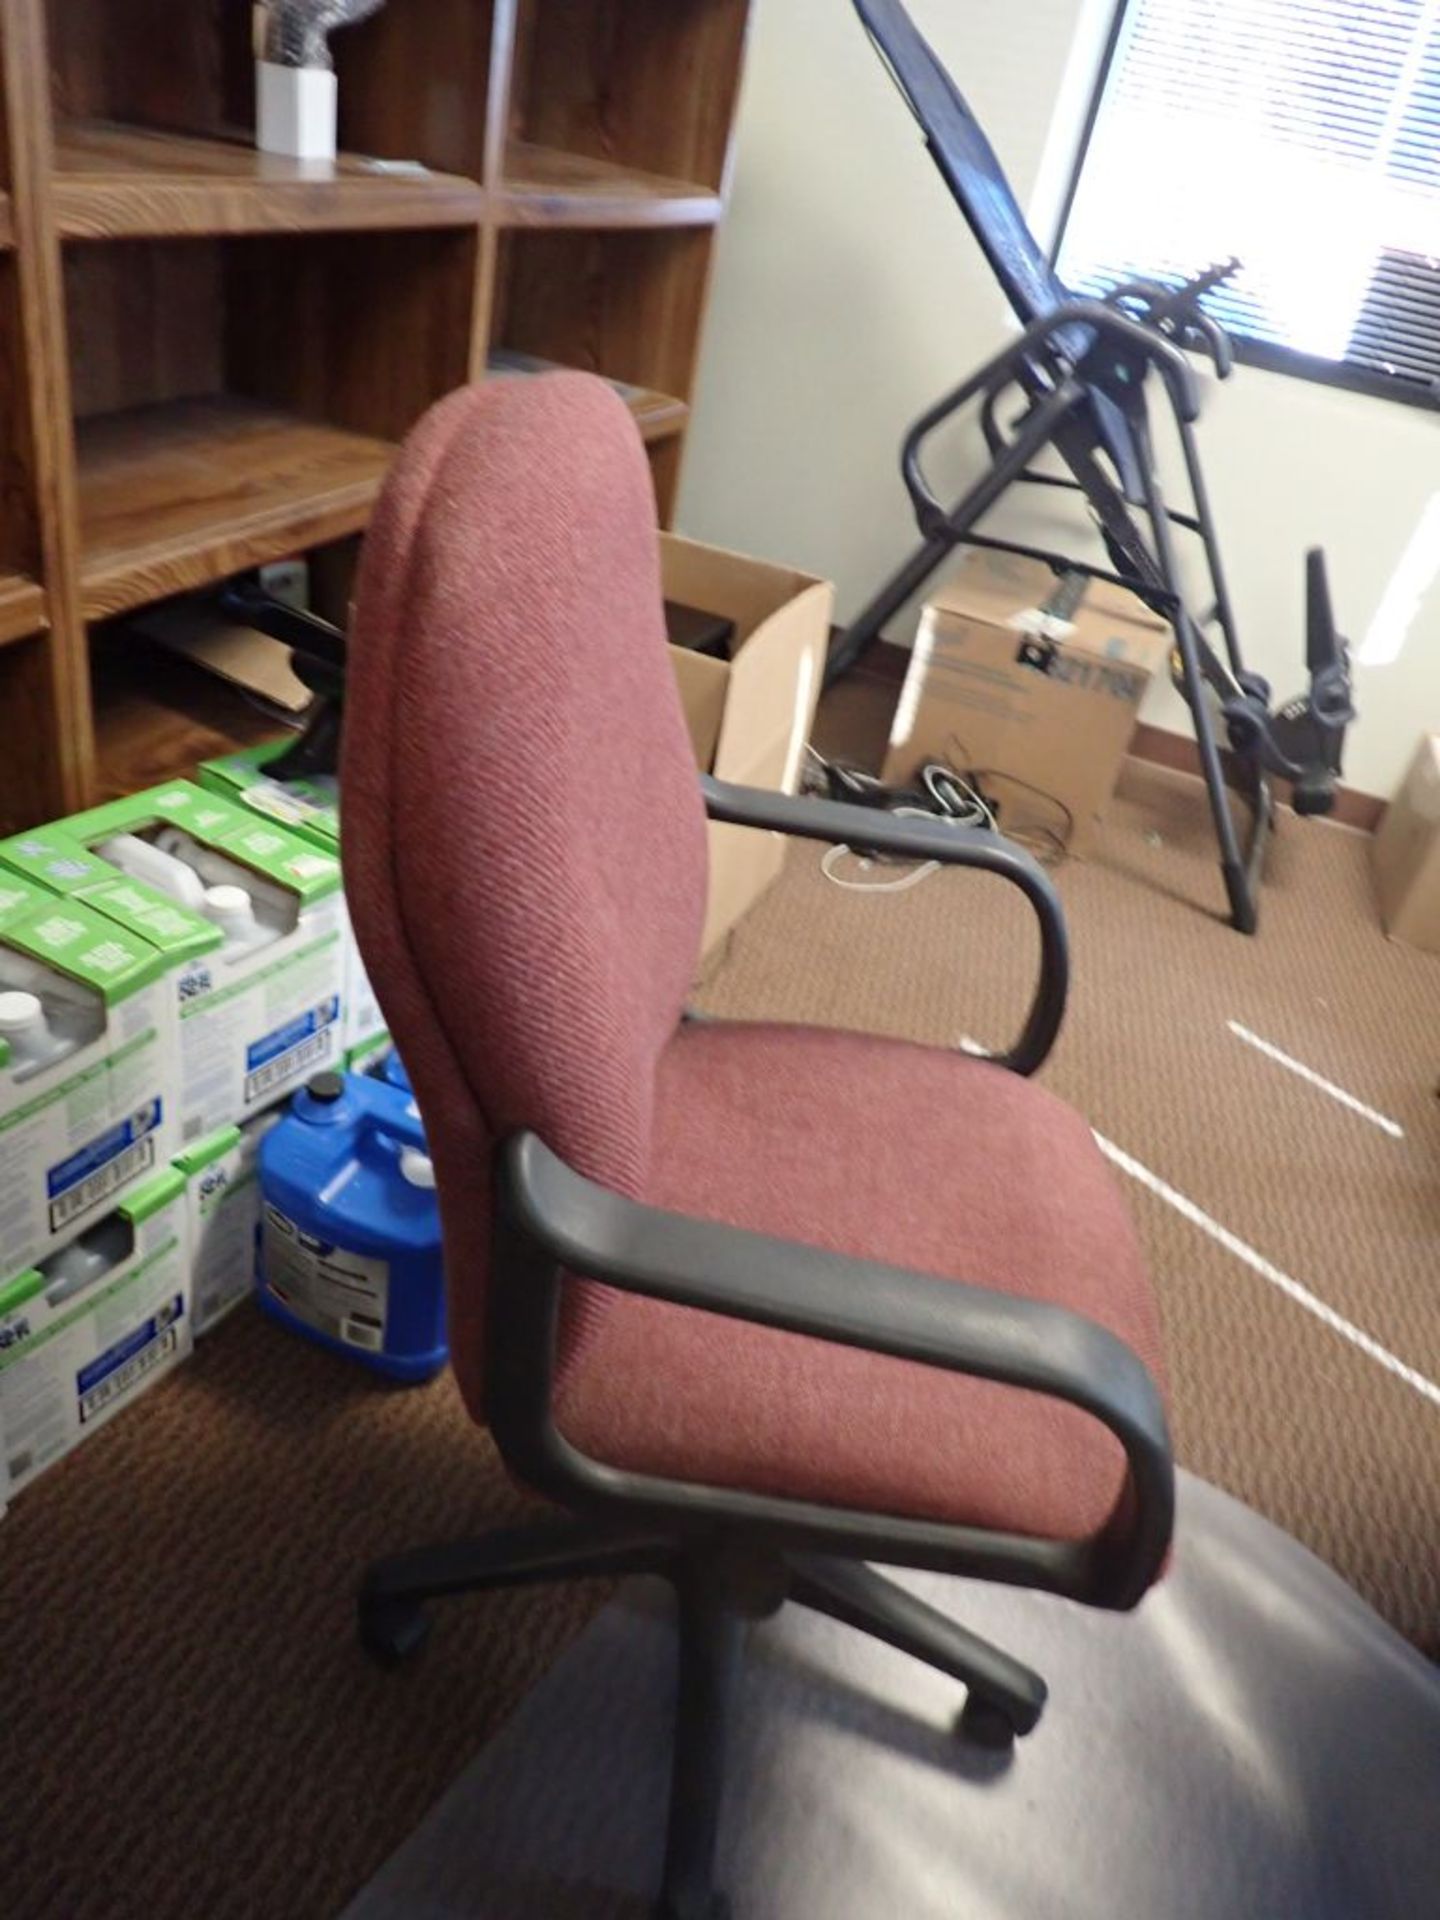 Lot of Conference Room Contents - Image 4 of 6